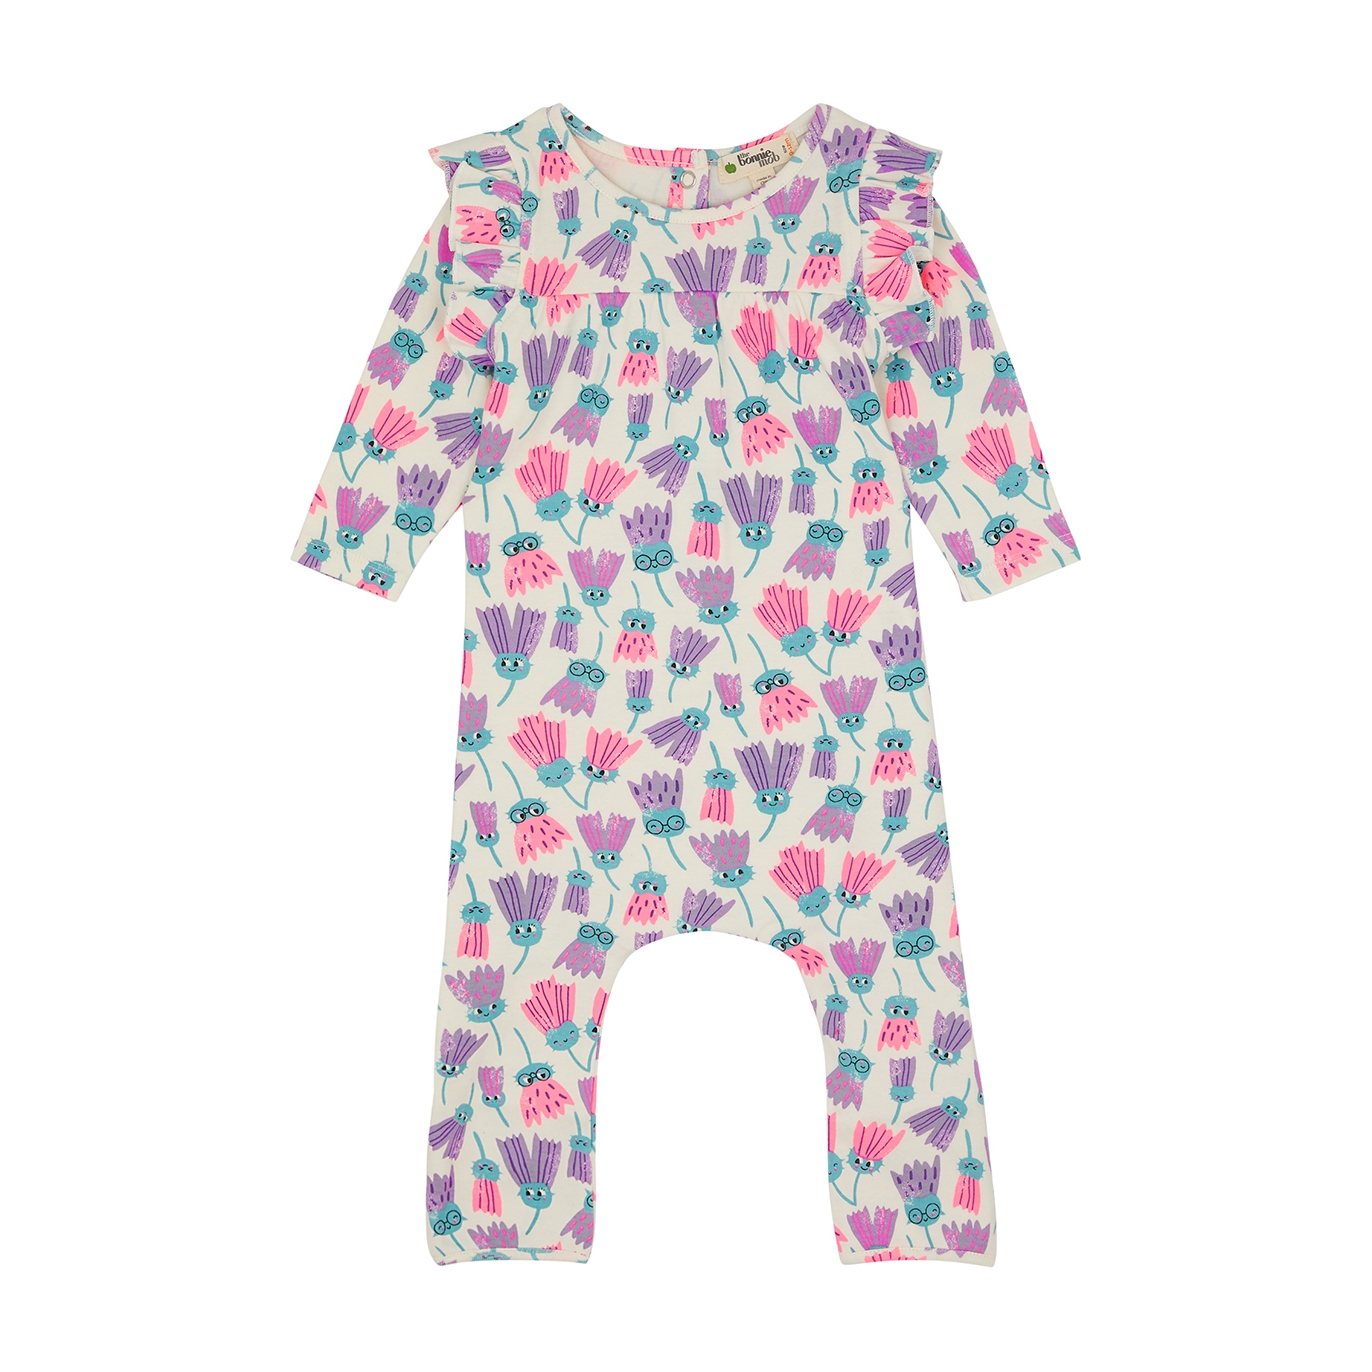 The Bonnie Mob Kids Printed Cotton Babygrow (3-12 Months) - Multicoloured